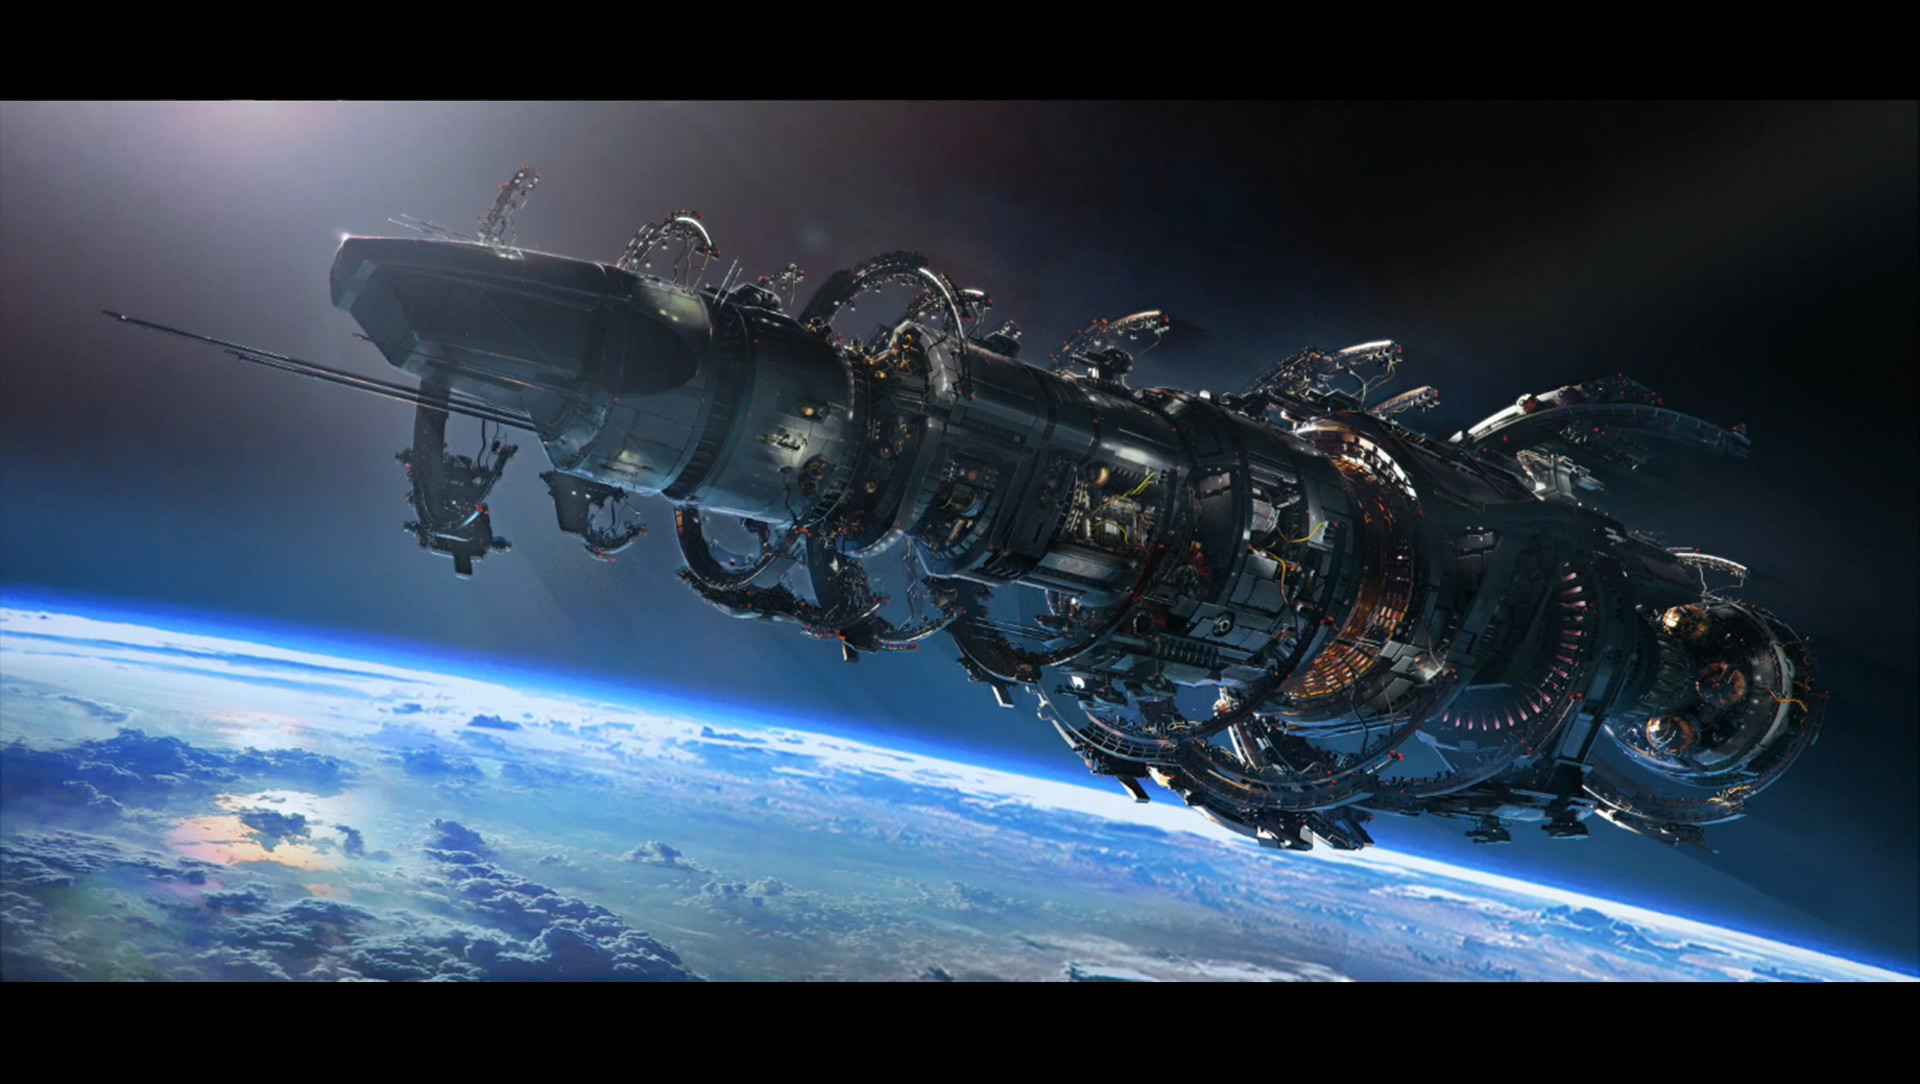 sci fi wallpaper,outer space,spacecraft,space,cg artwork,atmosphere